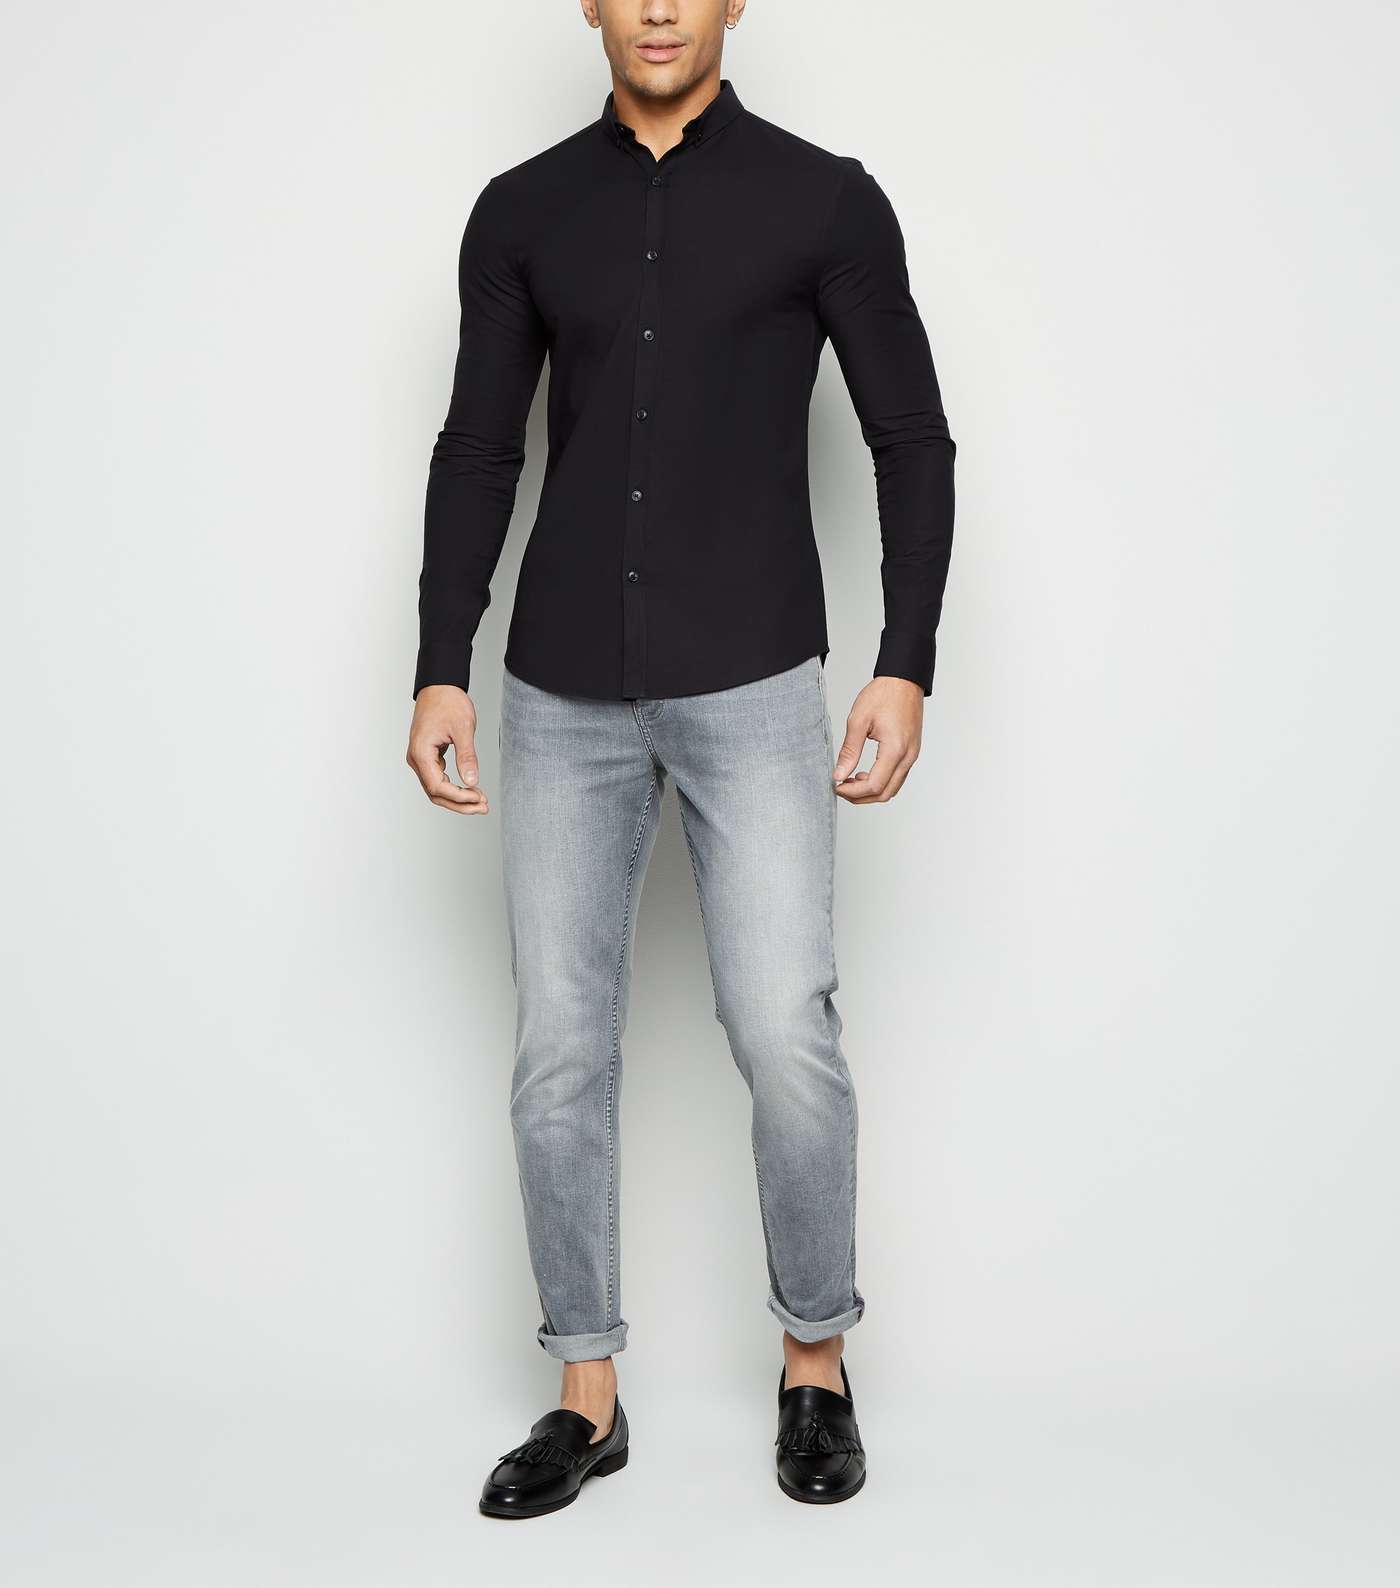 Black Muscle Fit Long Sleeve Oxford Shirt Image 2